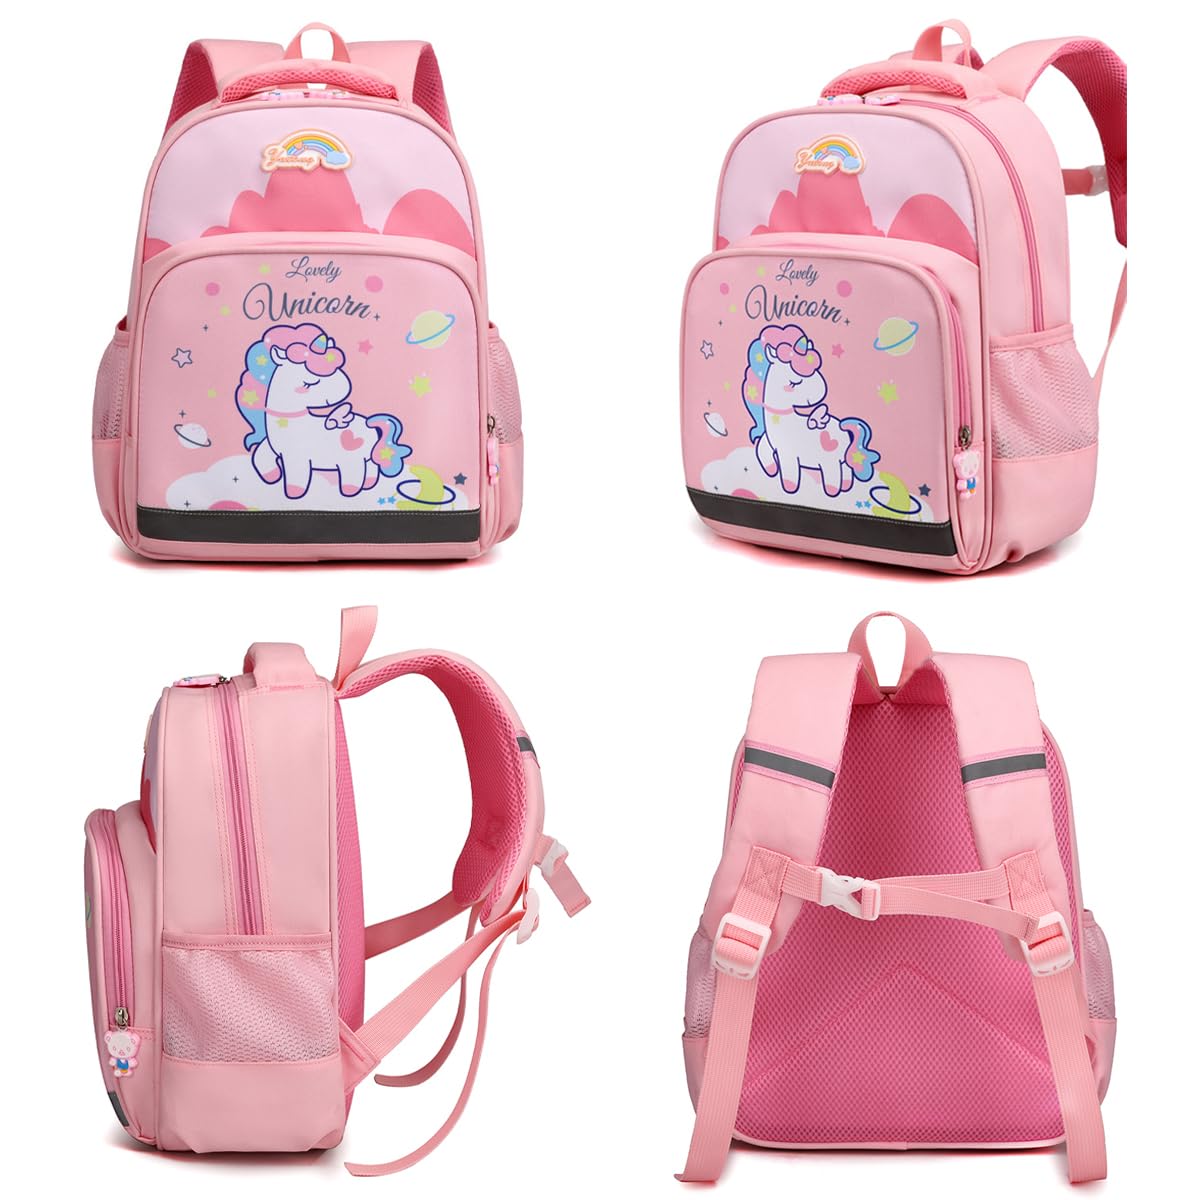 LESNIC Pink Kids Backpack Unicorn for Boys & Girls, Buckles in the Chest, CPC Certified, 12 inch Lightweight Breathable Cute Small Rucksack for Preschool or Kindergarten